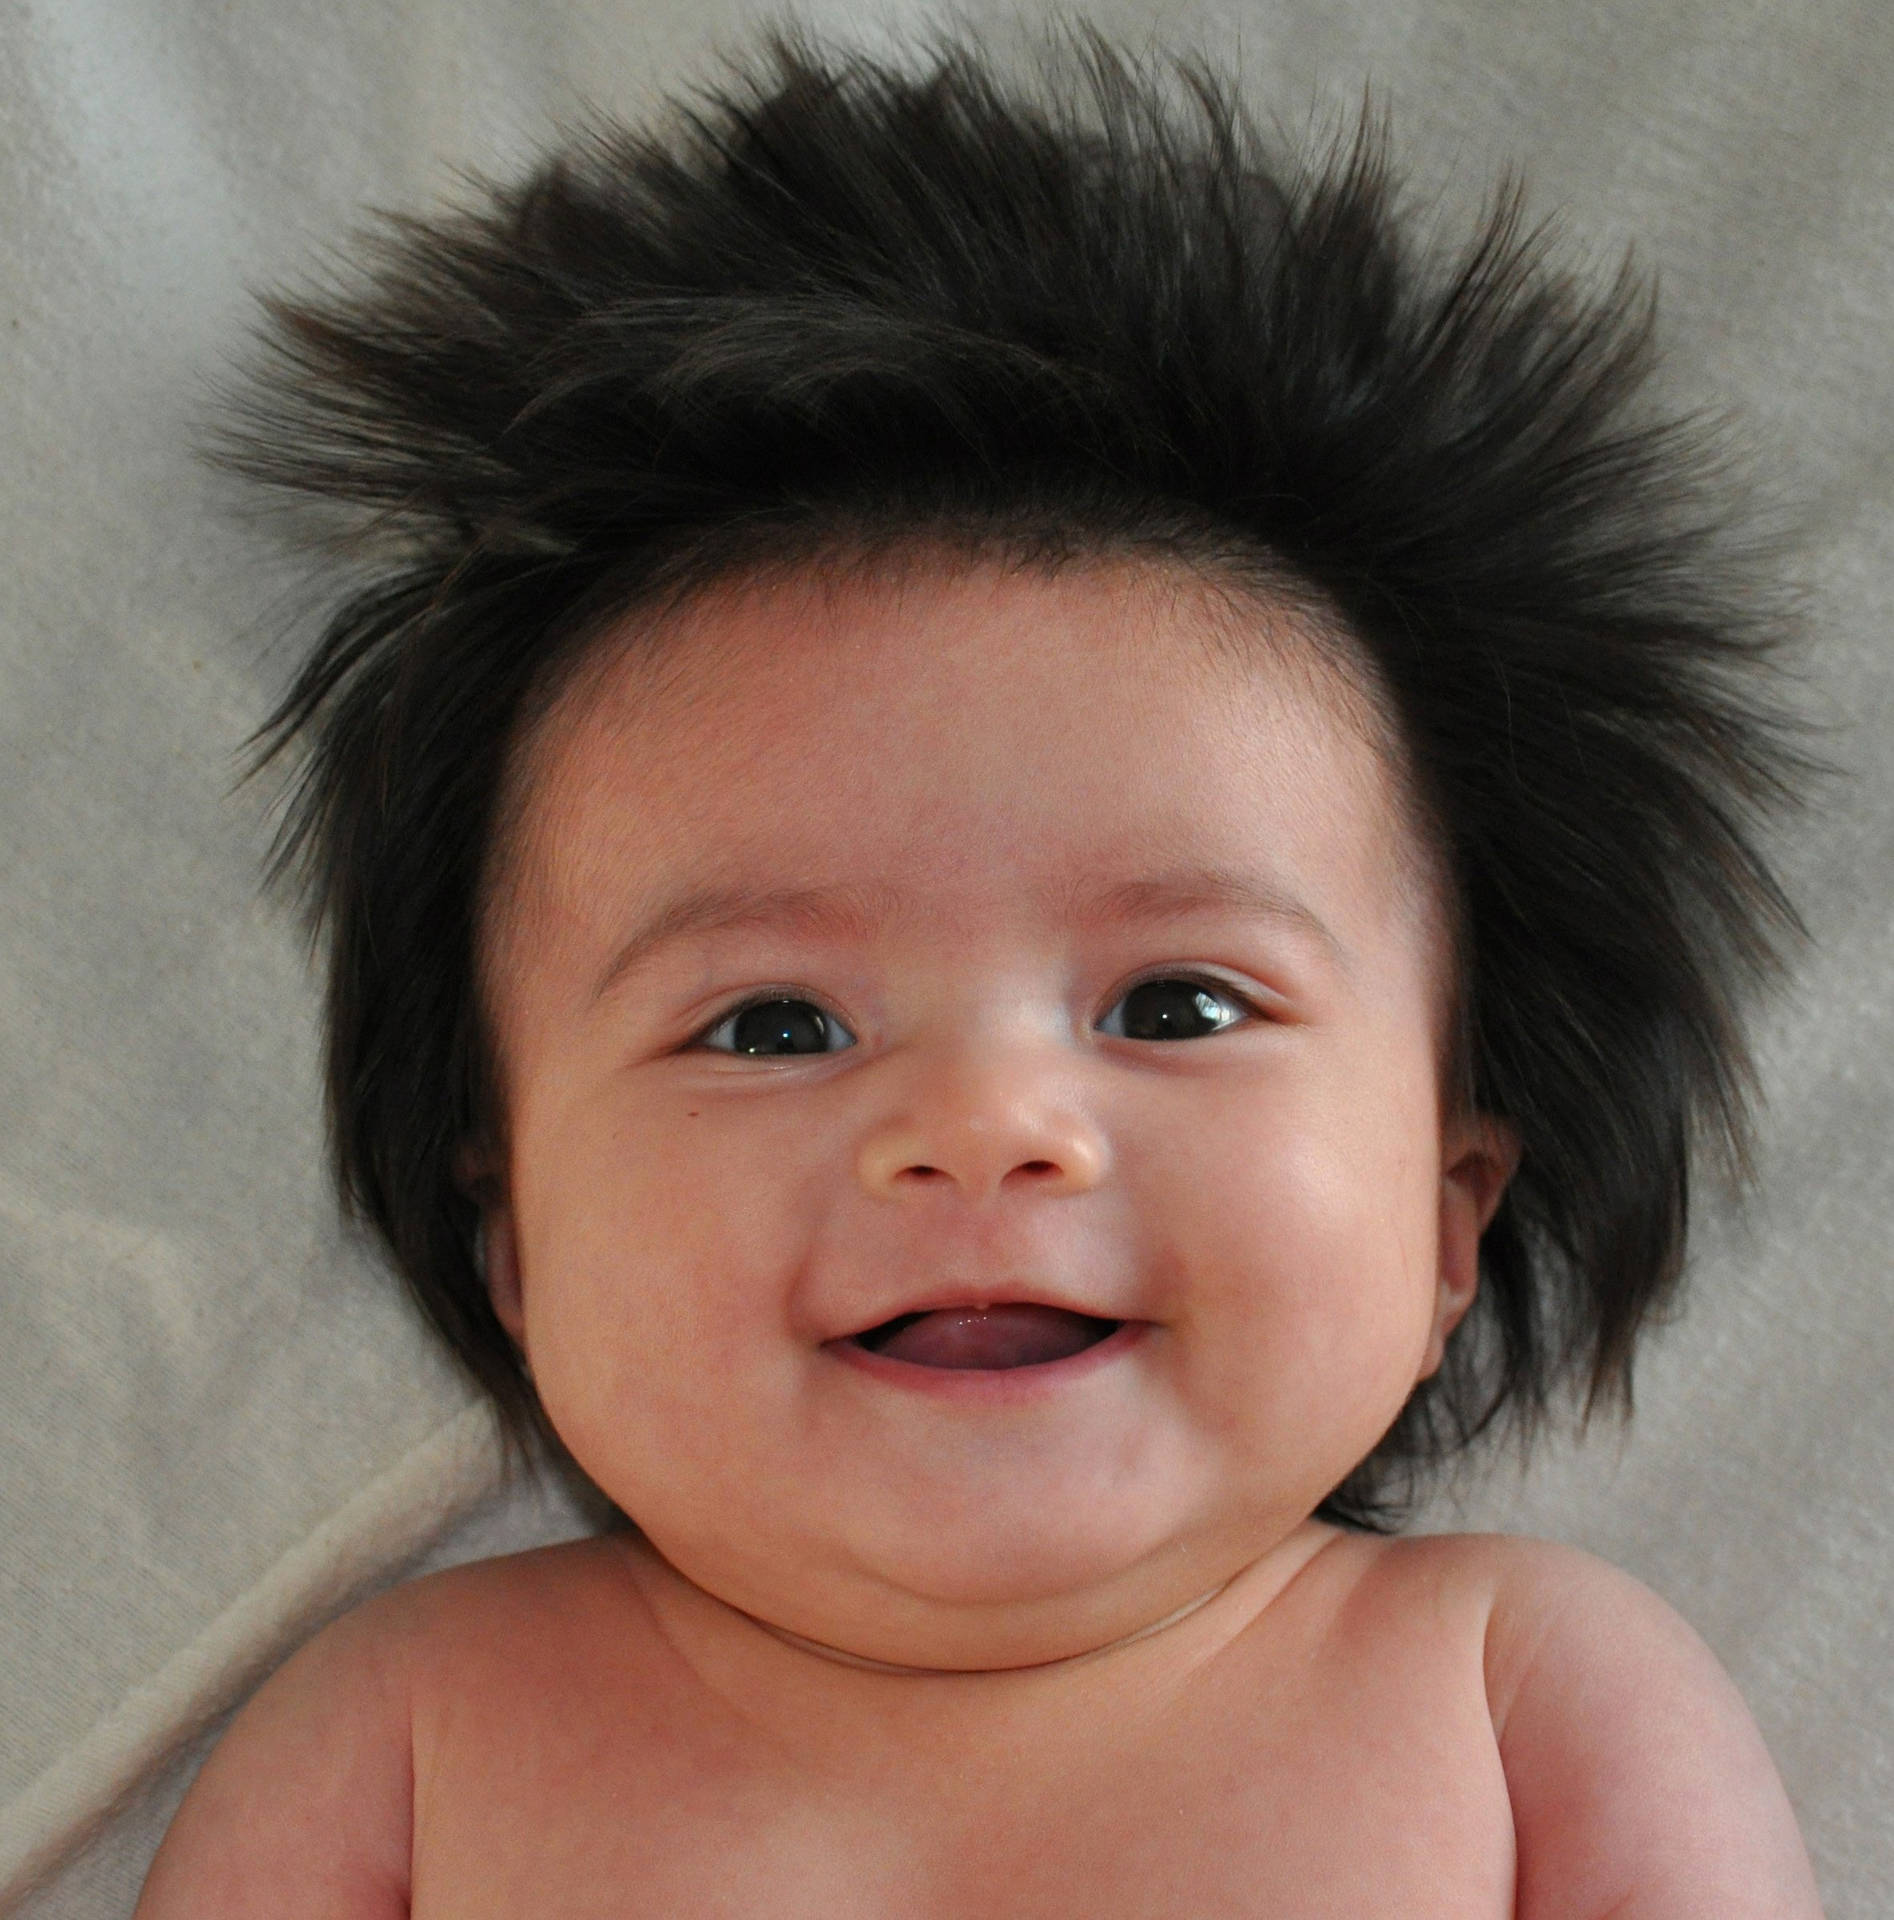 Charming Cuteness Overload: Hairy Funny Baby